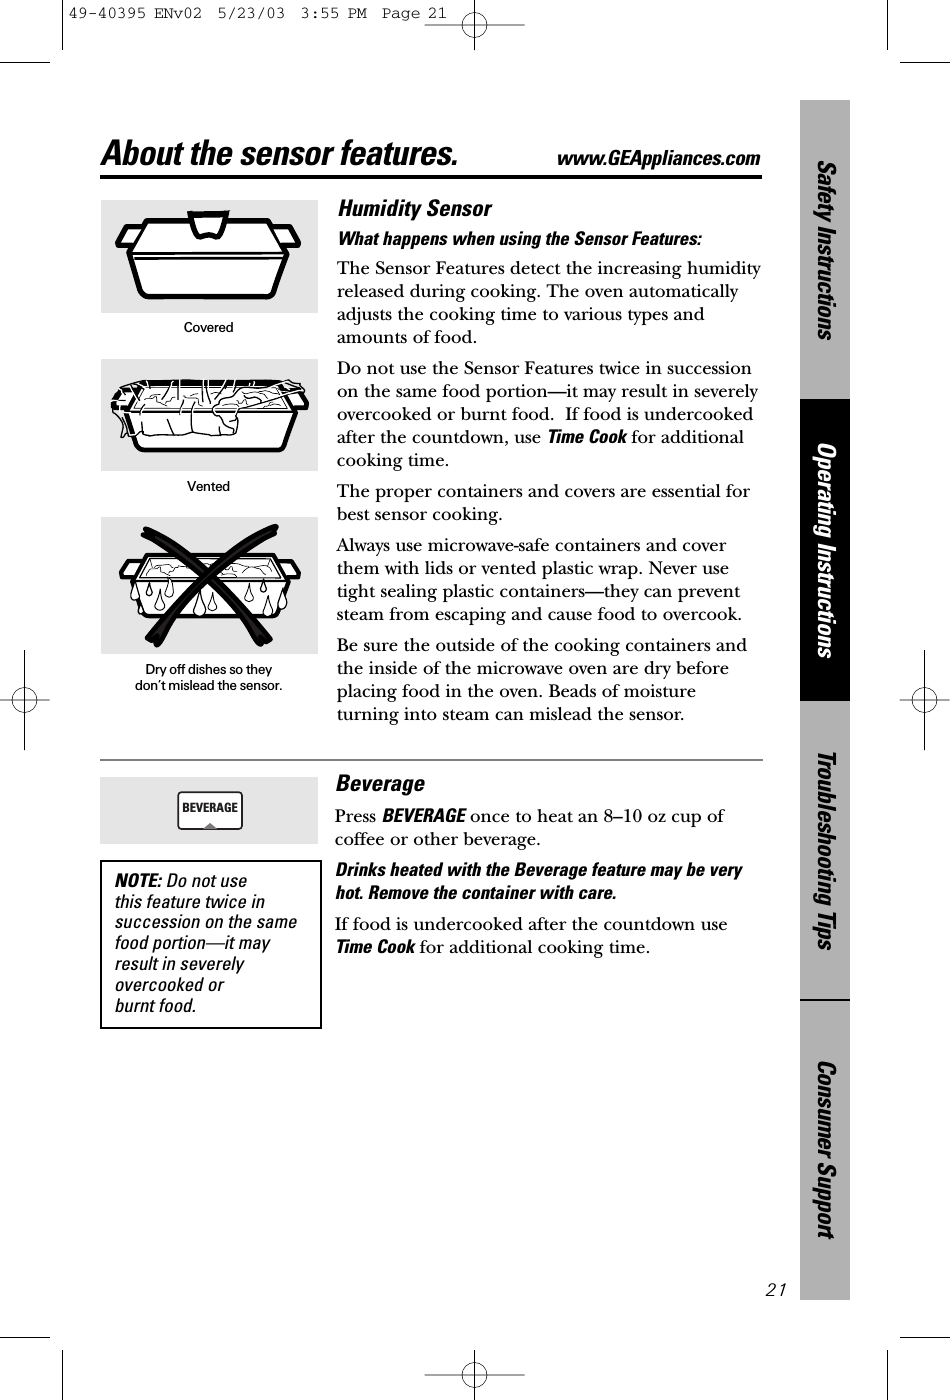 Consumer SupportTroubleshooting TipsOperating InstructionsSafety Instructions21About the sensor features. www.GEAppliances.comHumidity SensorWhat happens when using the Sensor Features: The Sensor Features detect the increasing humidityreleased during cooking. The oven automaticallyadjusts the cooking time to various types andamounts of food.Do not use the Sensor Features twice in successionon the same food portion—it may result in severelyovercooked or burnt food.  If food is undercookedafter the countdown, use Time Cook for additionalcooking time.The proper containers and covers are essential forbest sensor cooking.Always use microwave-safe containers and coverthem with lids or vented plastic wrap. Never usetight sealing plastic containers—they can preventsteam from escaping and cause food to overcook.Be sure the outside of the cooking containers andthe inside of the microwave oven are dry beforeplacing food in the oven. Beads of moistureturning into steam can mislead the sensor.CoveredVentedDry off dishes so they don’t mislead the sensor.BeveragePress BEVERAGE once to heat an 8–10 oz cup ofcoffee or other beverage.Drinks heated with the Beverage feature may be veryhot. Remove the container with care.If food is undercooked after the countdown useTime Cook for additional cooking time.BEVERAGENOTE: Do not use this feature twice insuccession on the samefood portion—it mayresult in severelyovercooked or burnt food.49-40395 ENv02  5/23/03  3:55 PM  Page 21